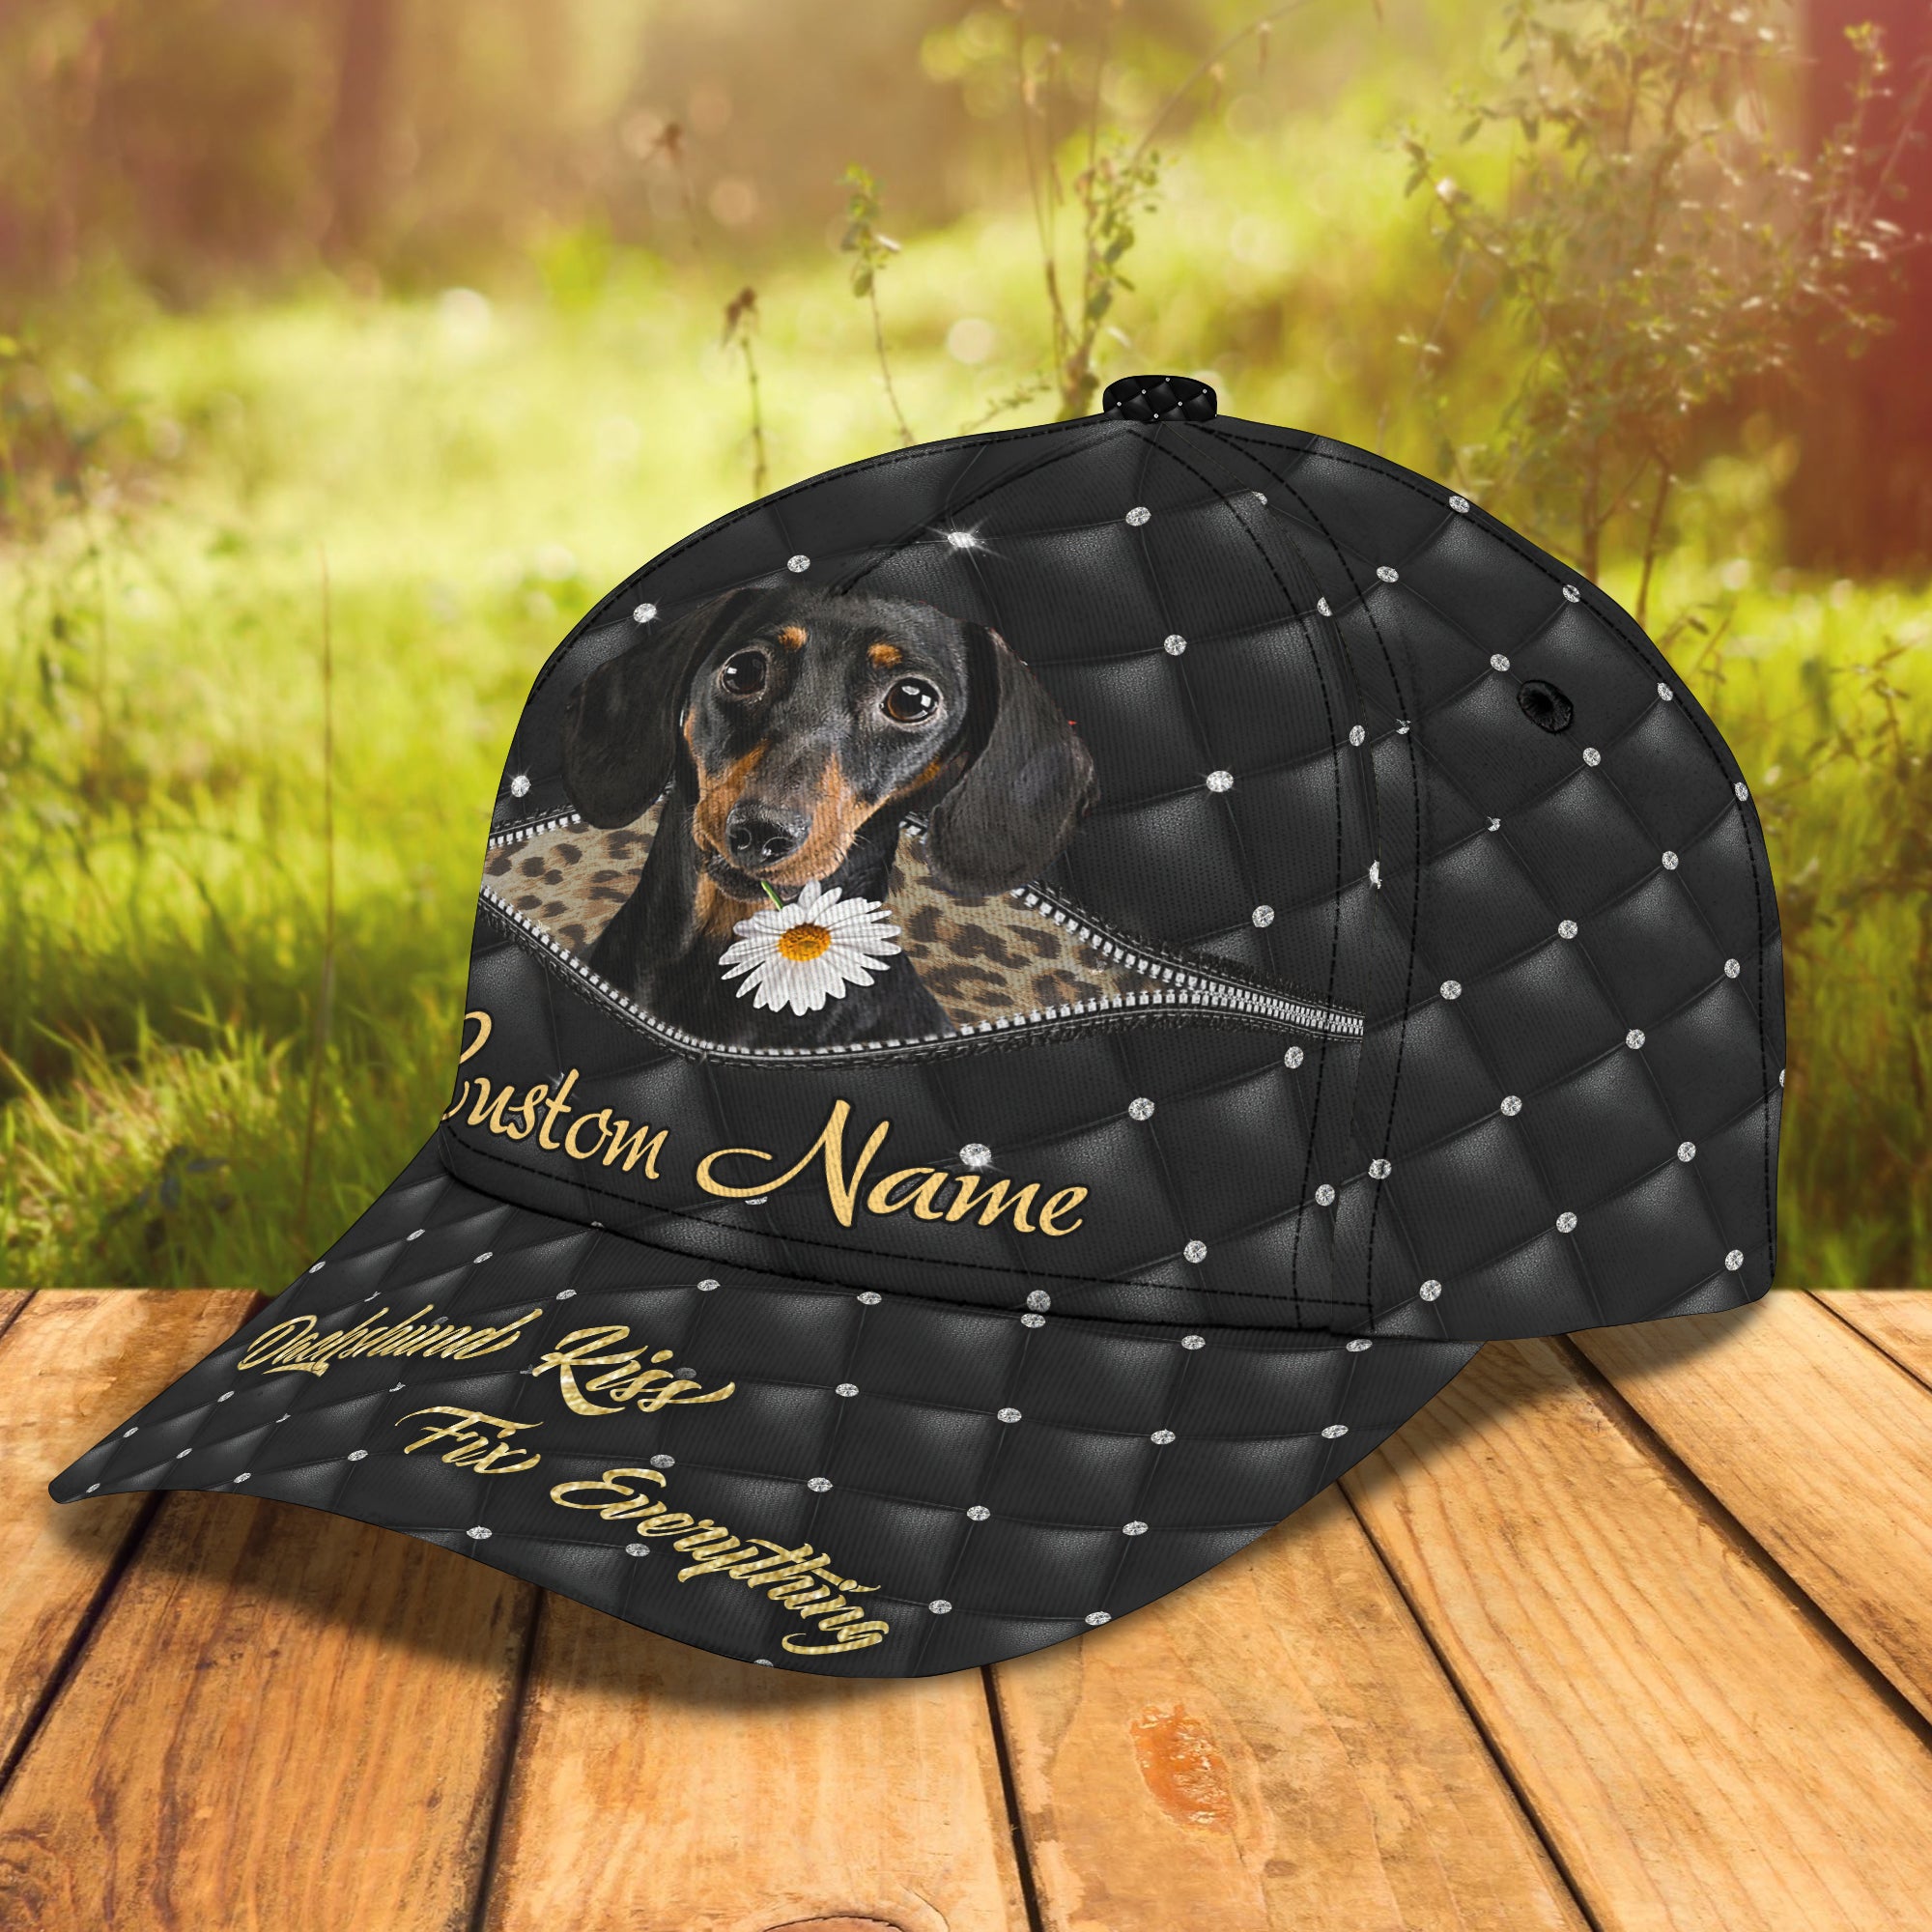 Love Dachshund - Personalized Name Cap 12 - Tad